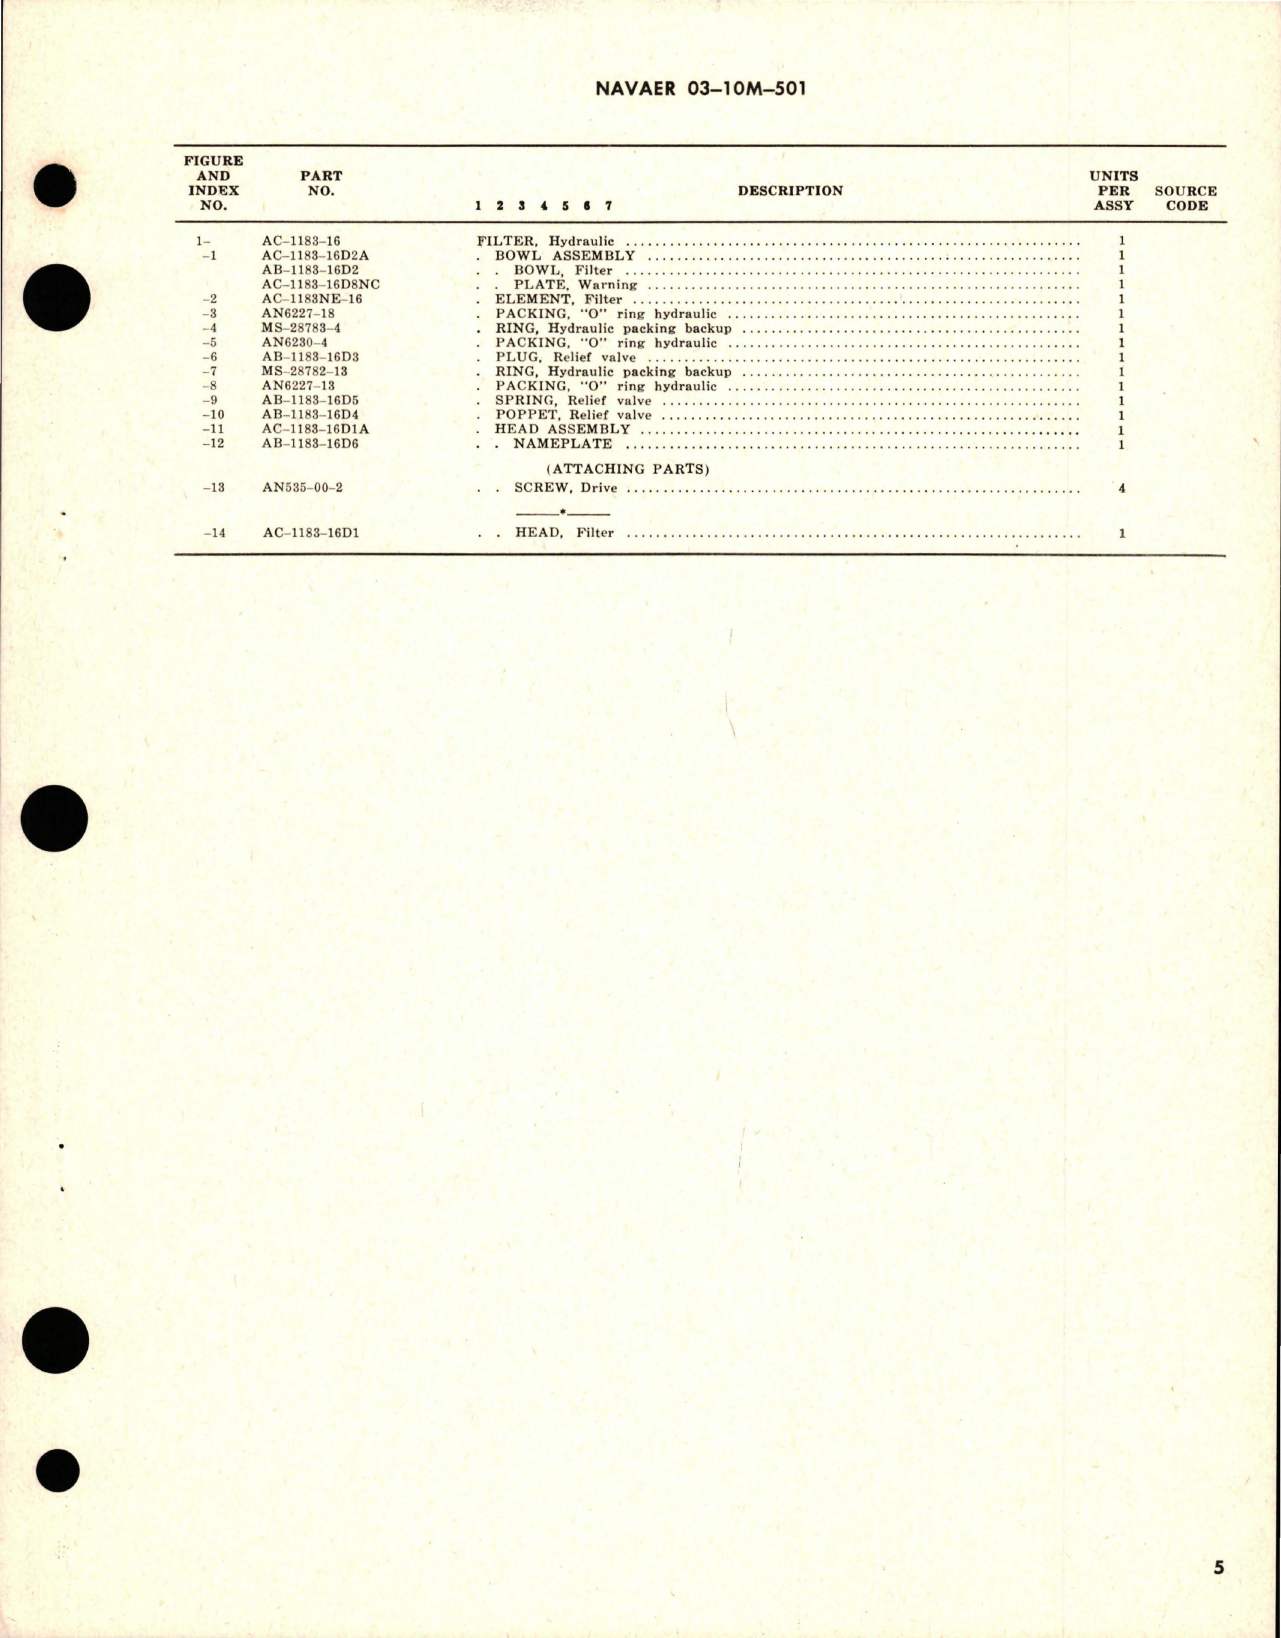 Sample page 5 from AirCorps Library document: Overhaul Instructions with Parts Breakdown for Hydraulic Filter - Part AC-1183-16 